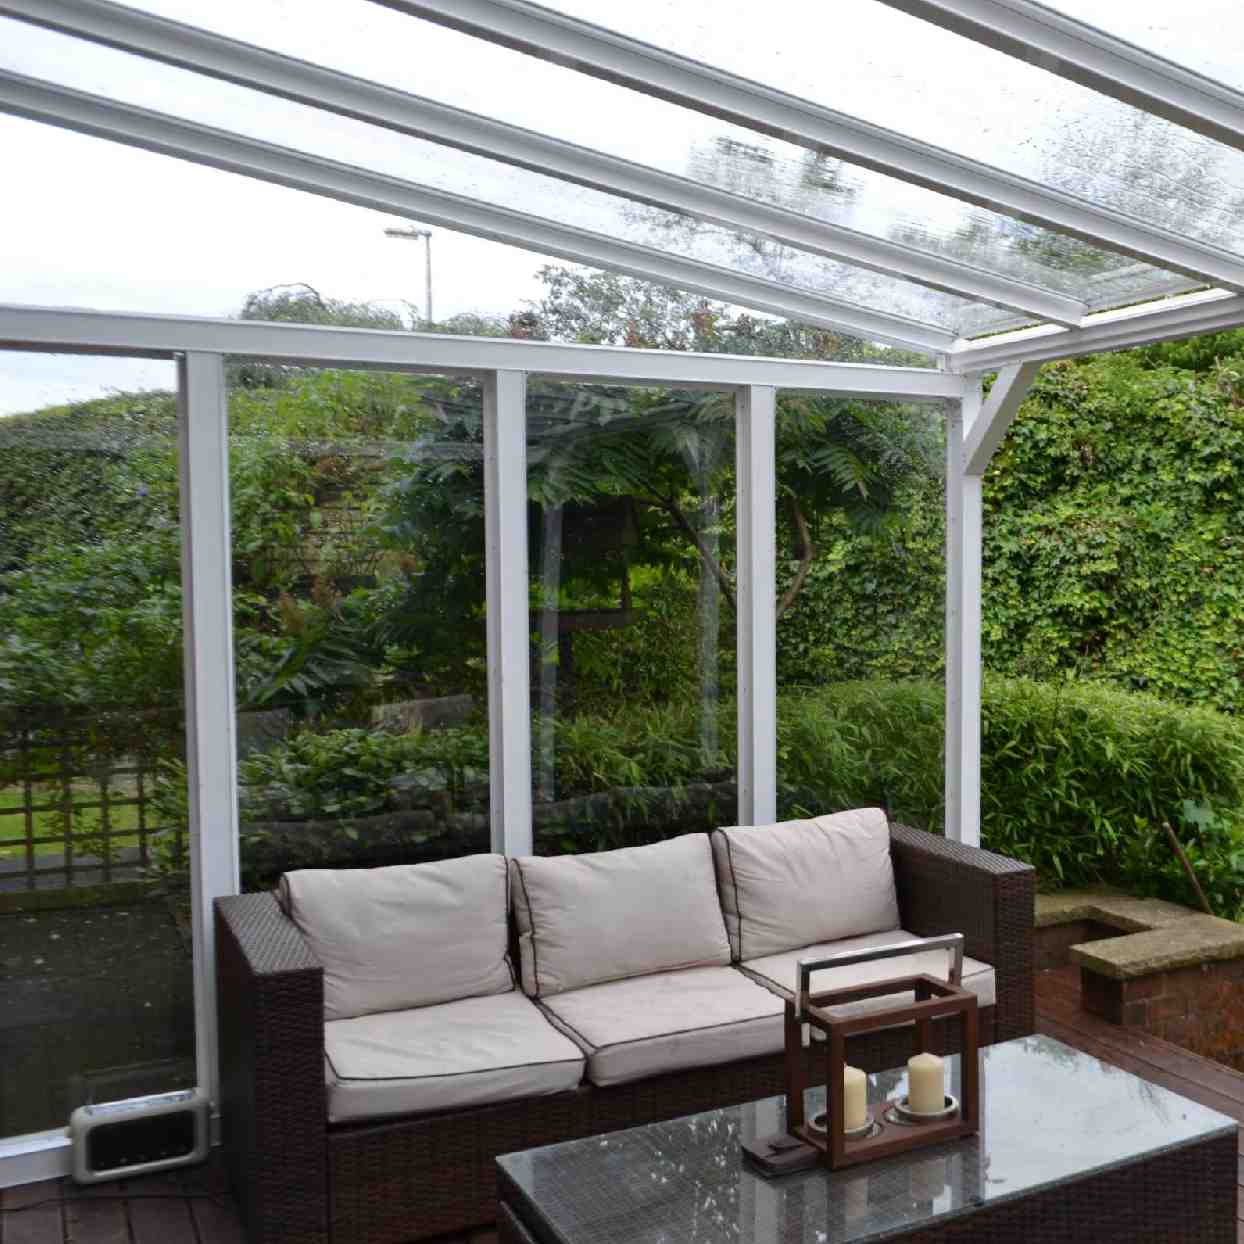 Buy Omega Verandah White with 6mm Glass Clear Plate Polycarbonate Glazing - 9.8m (W) x 2.0m (P), (5) Supporting Posts online today